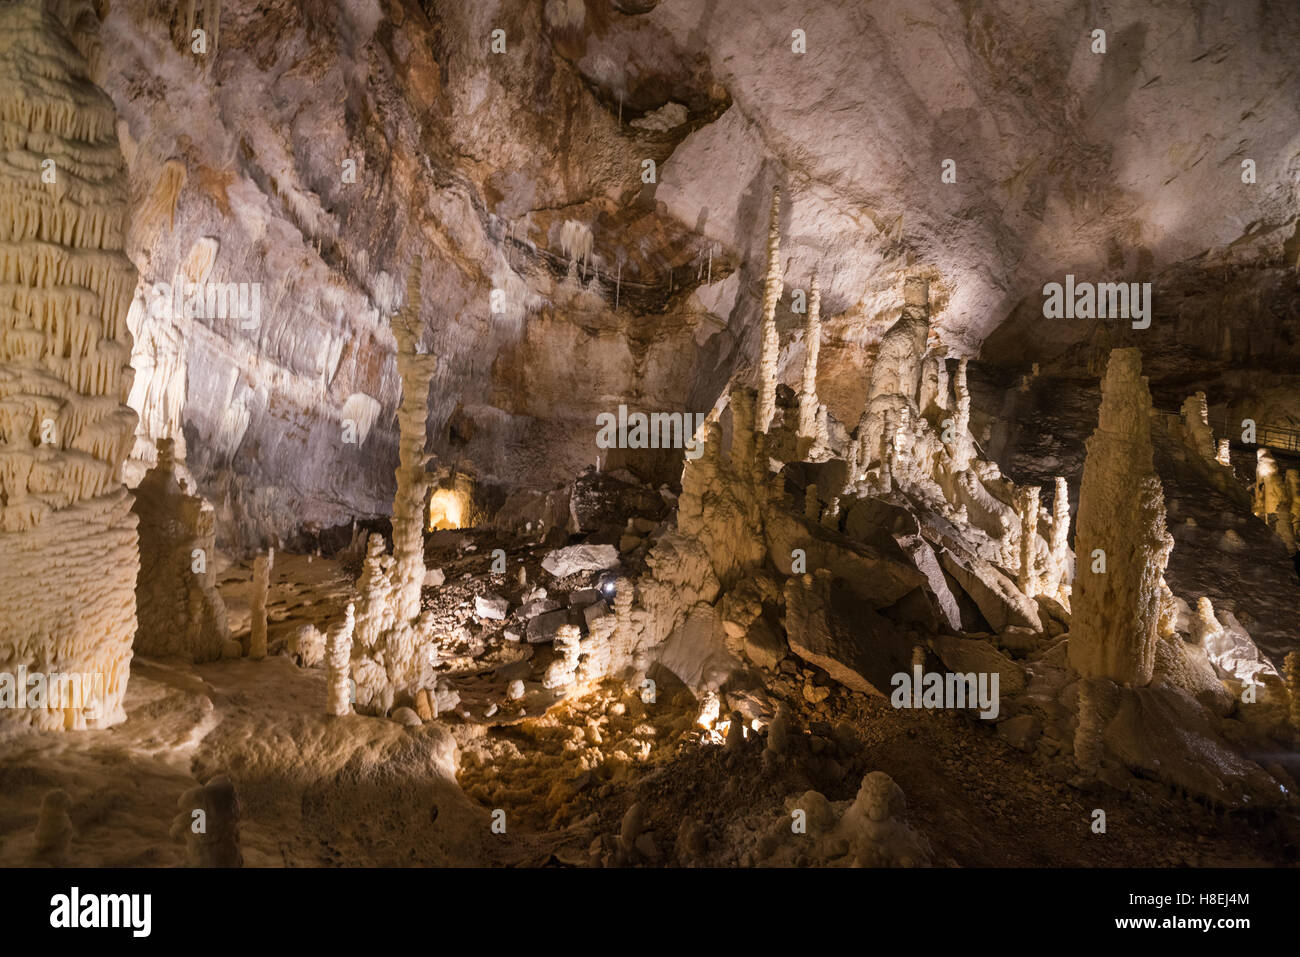 The natural show of Frasassi Caves with sharp stalactites and stalagmites, Genga, Province of Ancona, Marche, Italy, Europe Stock Photo